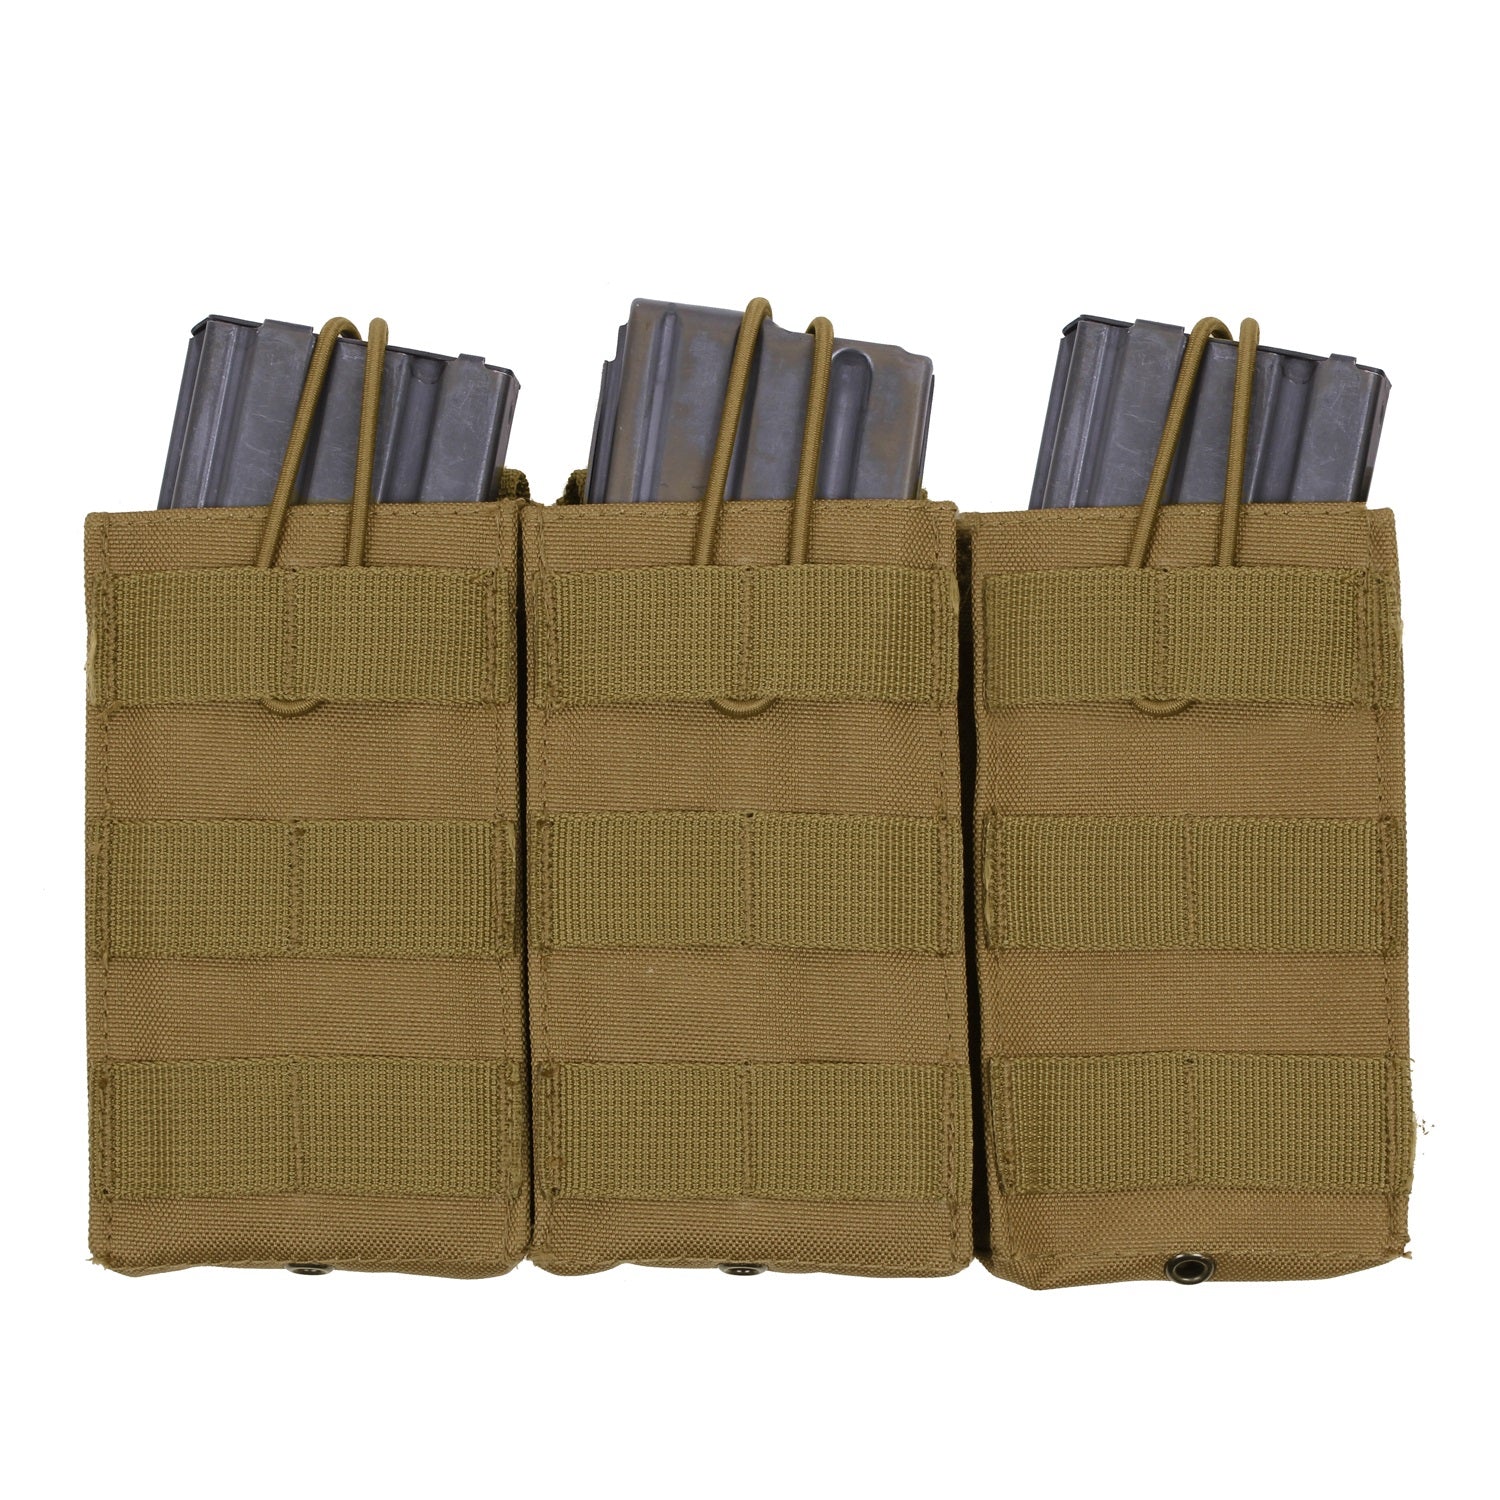 Rothco MOLLE Open Top Triple Mag Pouch Coyote Brown